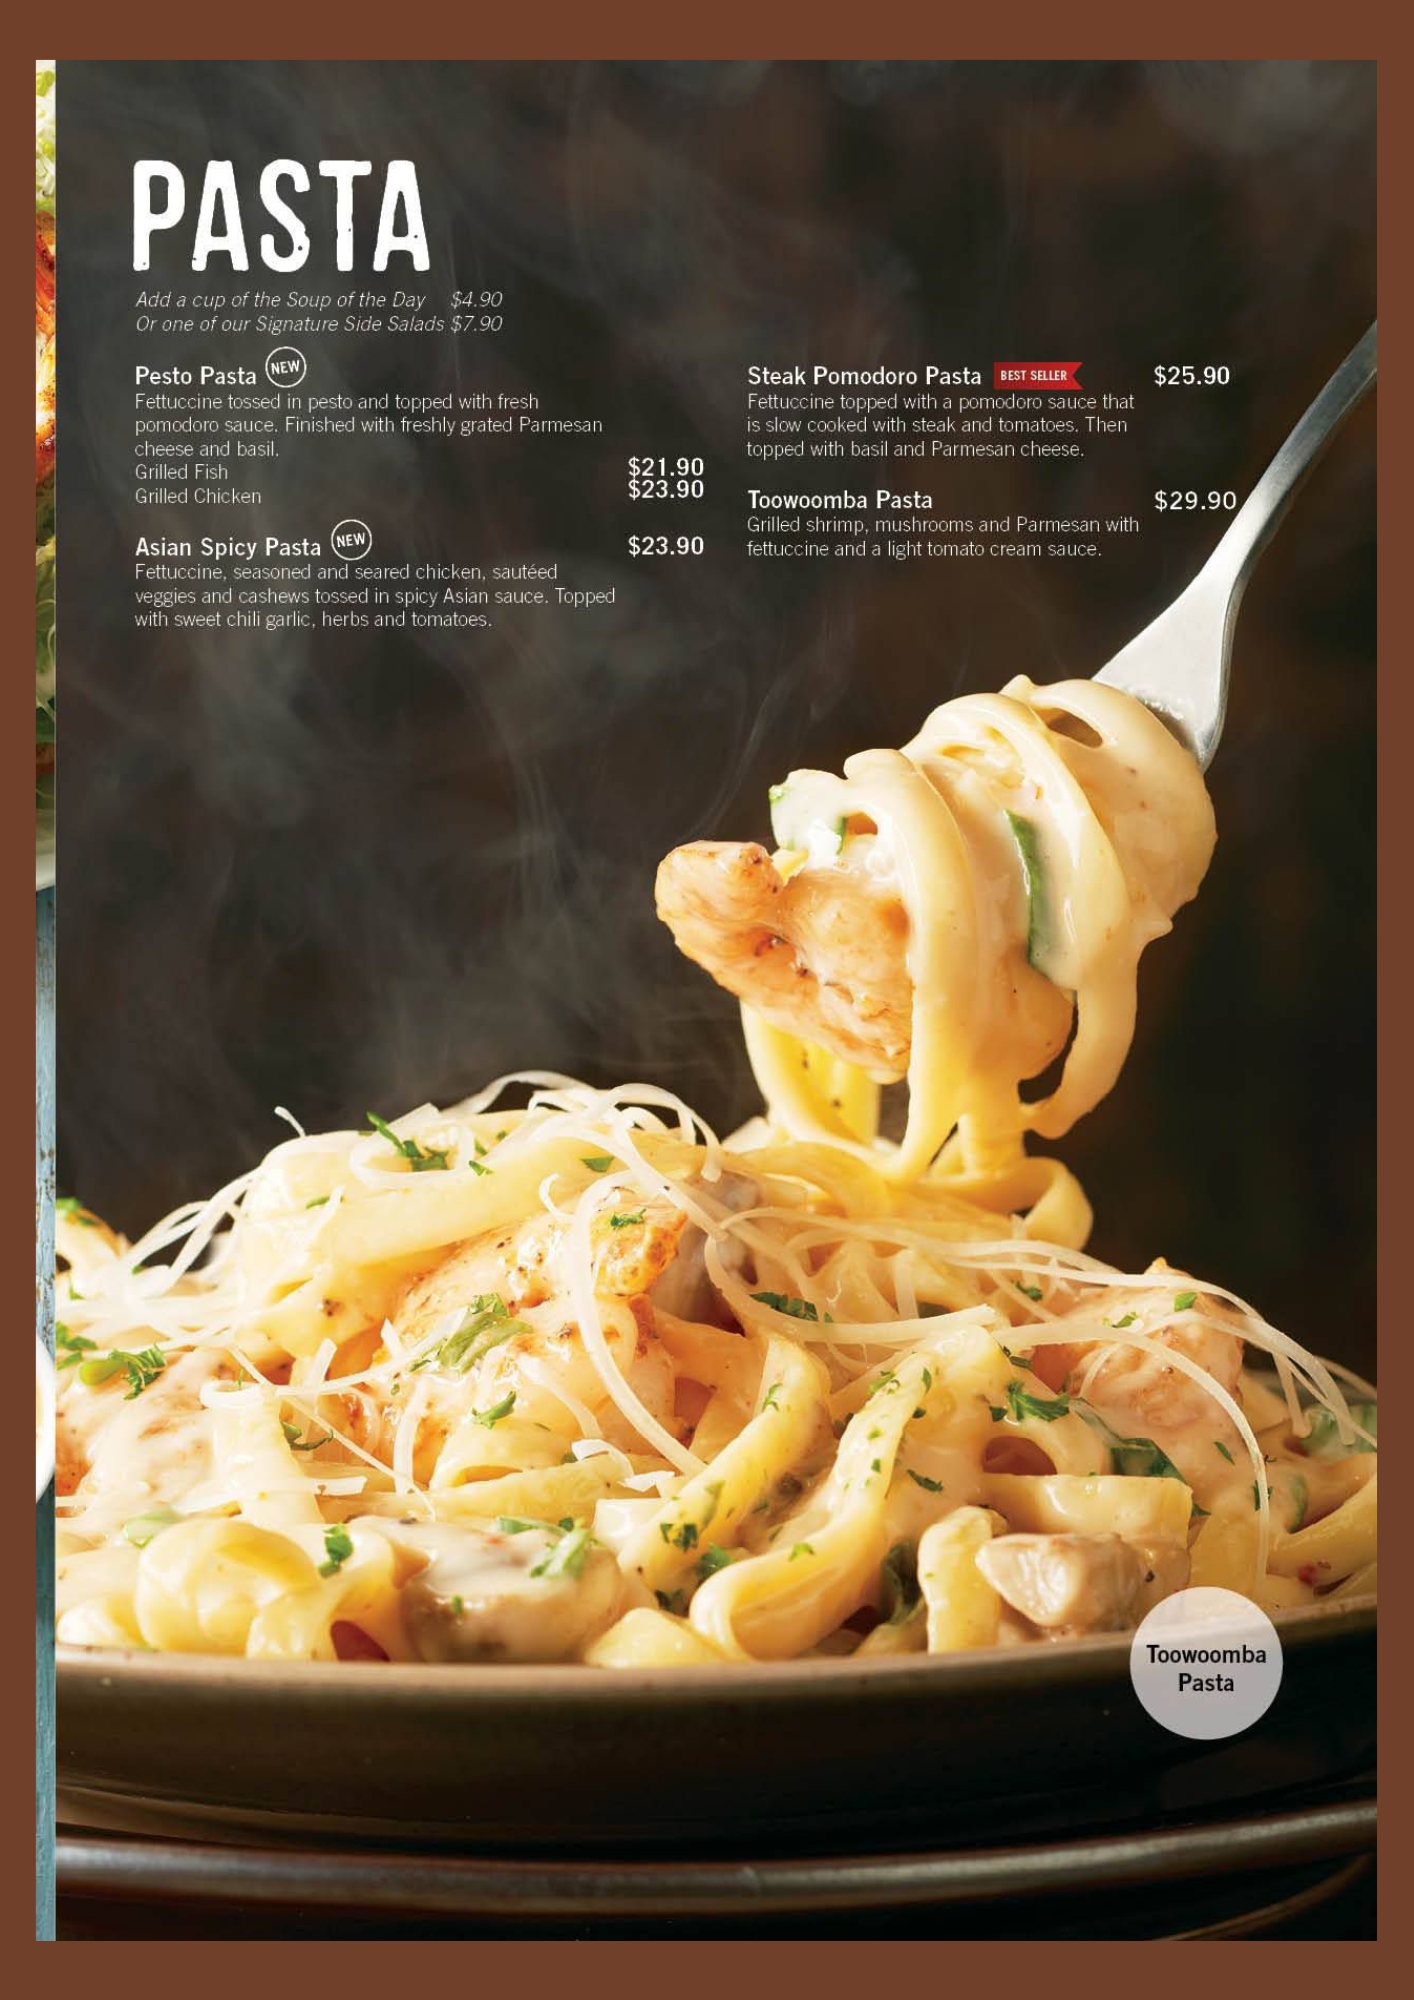 Outback Steakhouse Pasta Price